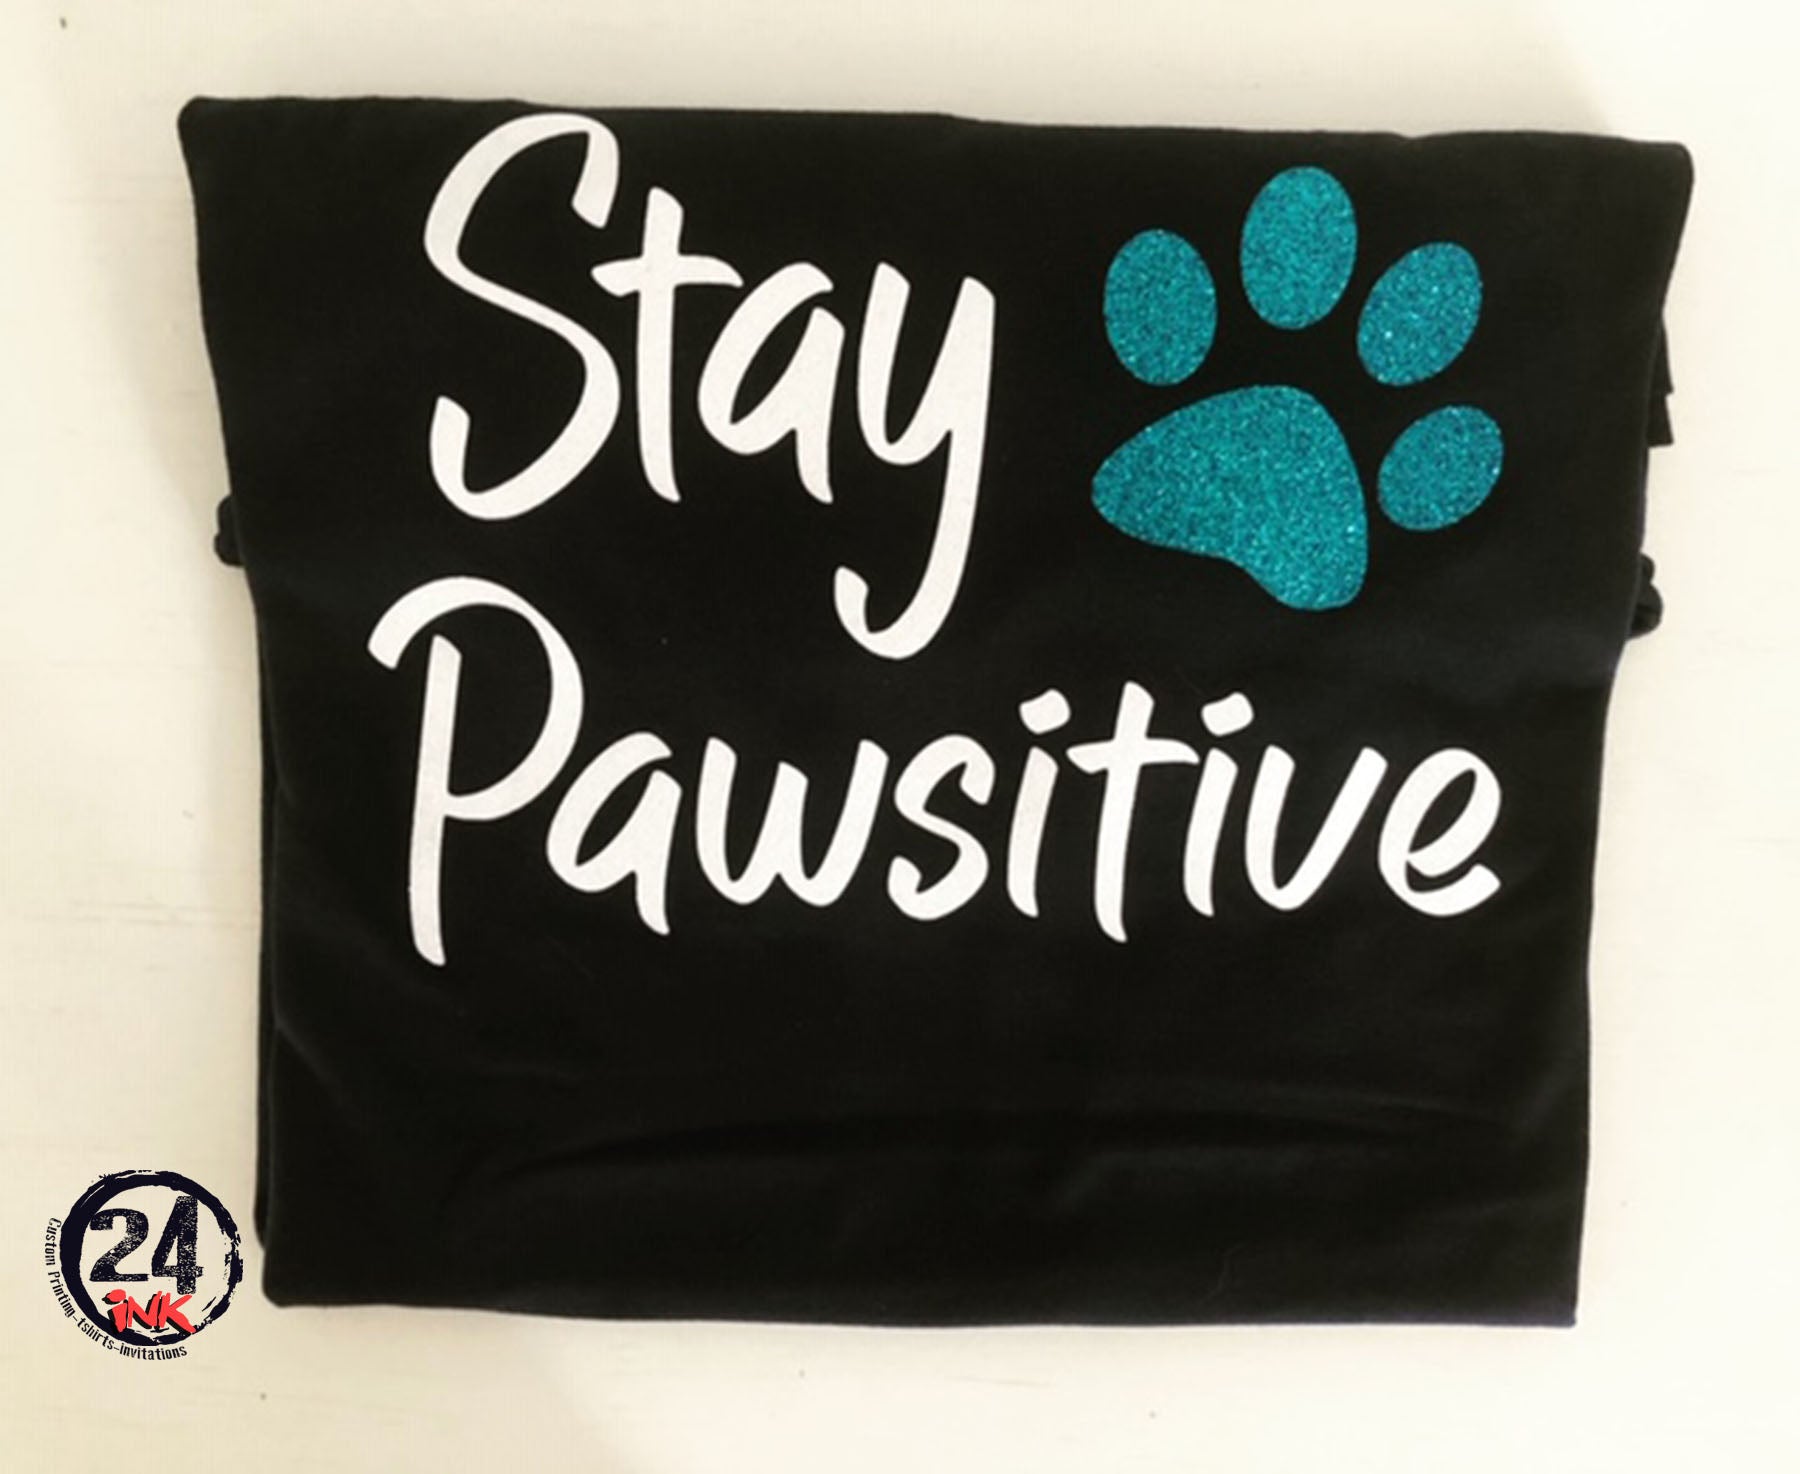 Stay Pawsitive Shirt